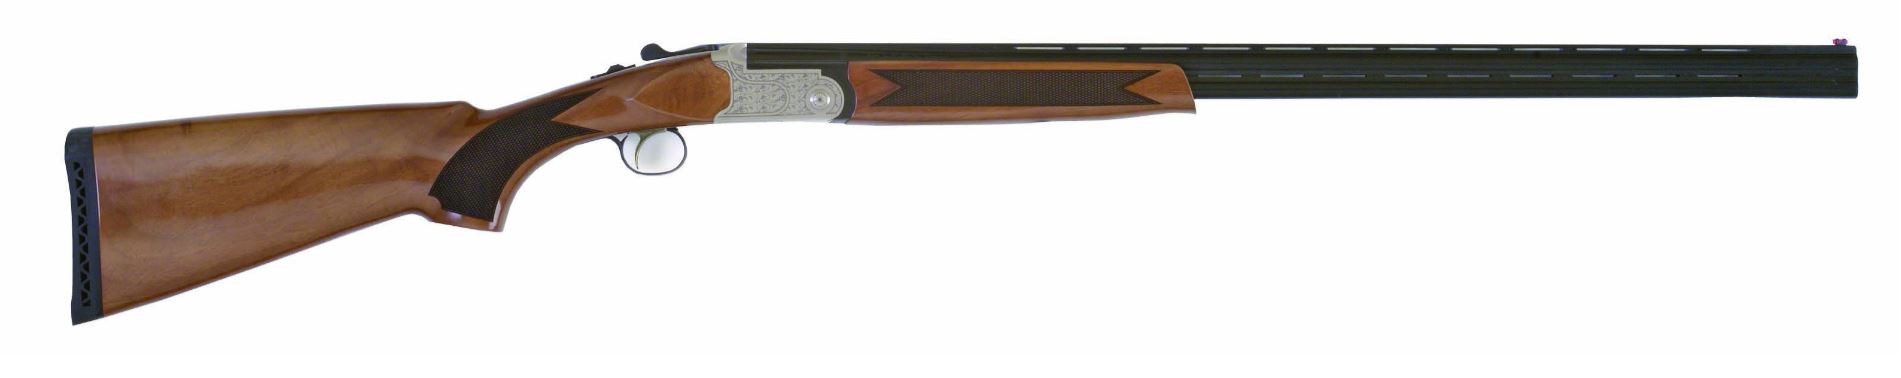 TriStar Sporting Arms Setter S/T 410 Bore